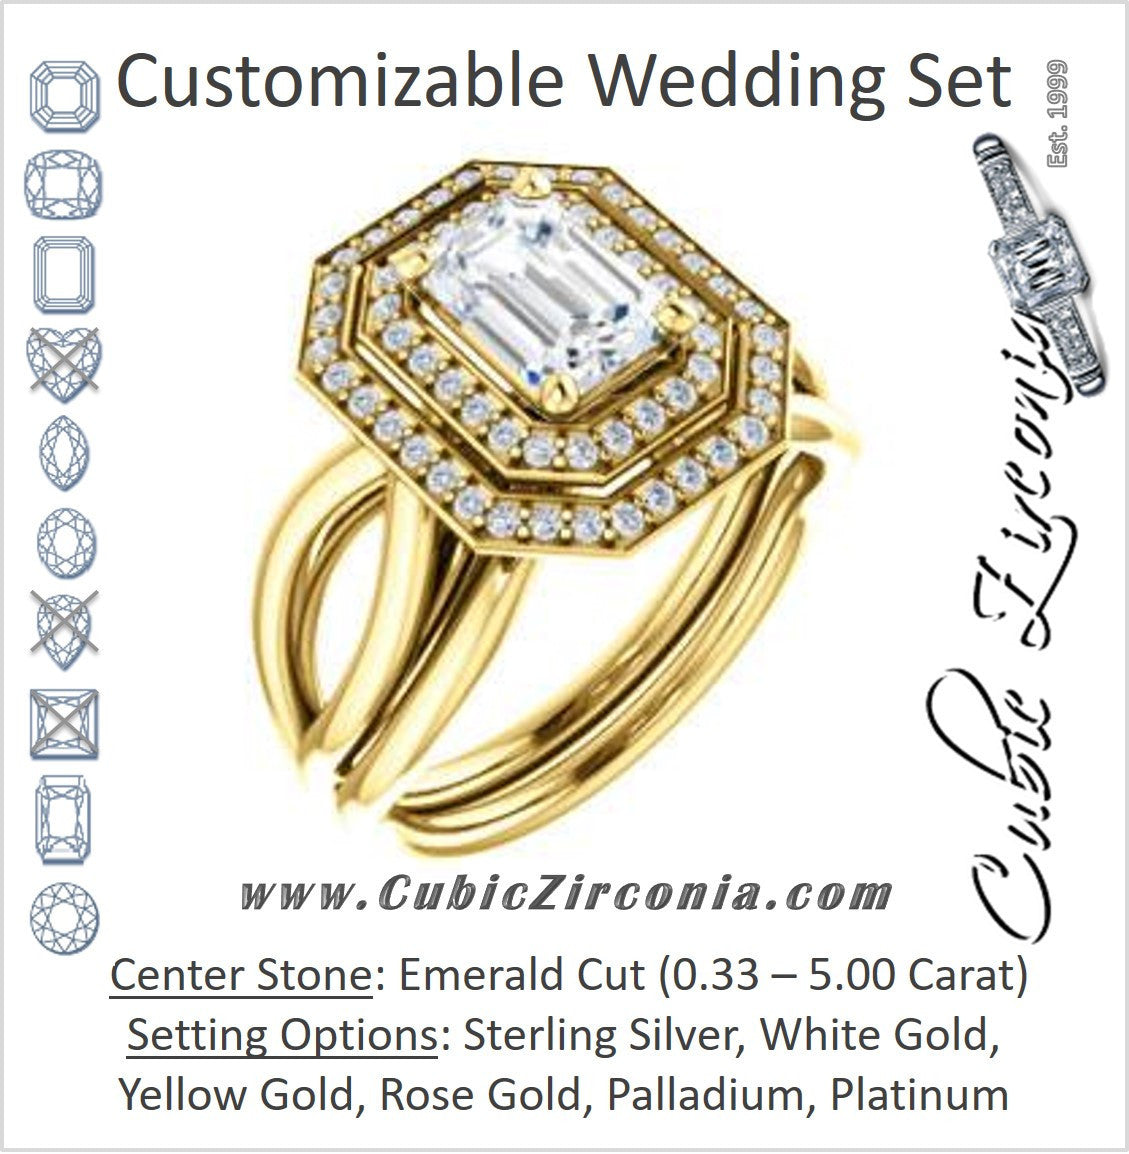 CZ Wedding Set, featuring The Magda Lesli engagement ring (Customizable Double-Halo Style Emerald Cut with Curving Split Band)